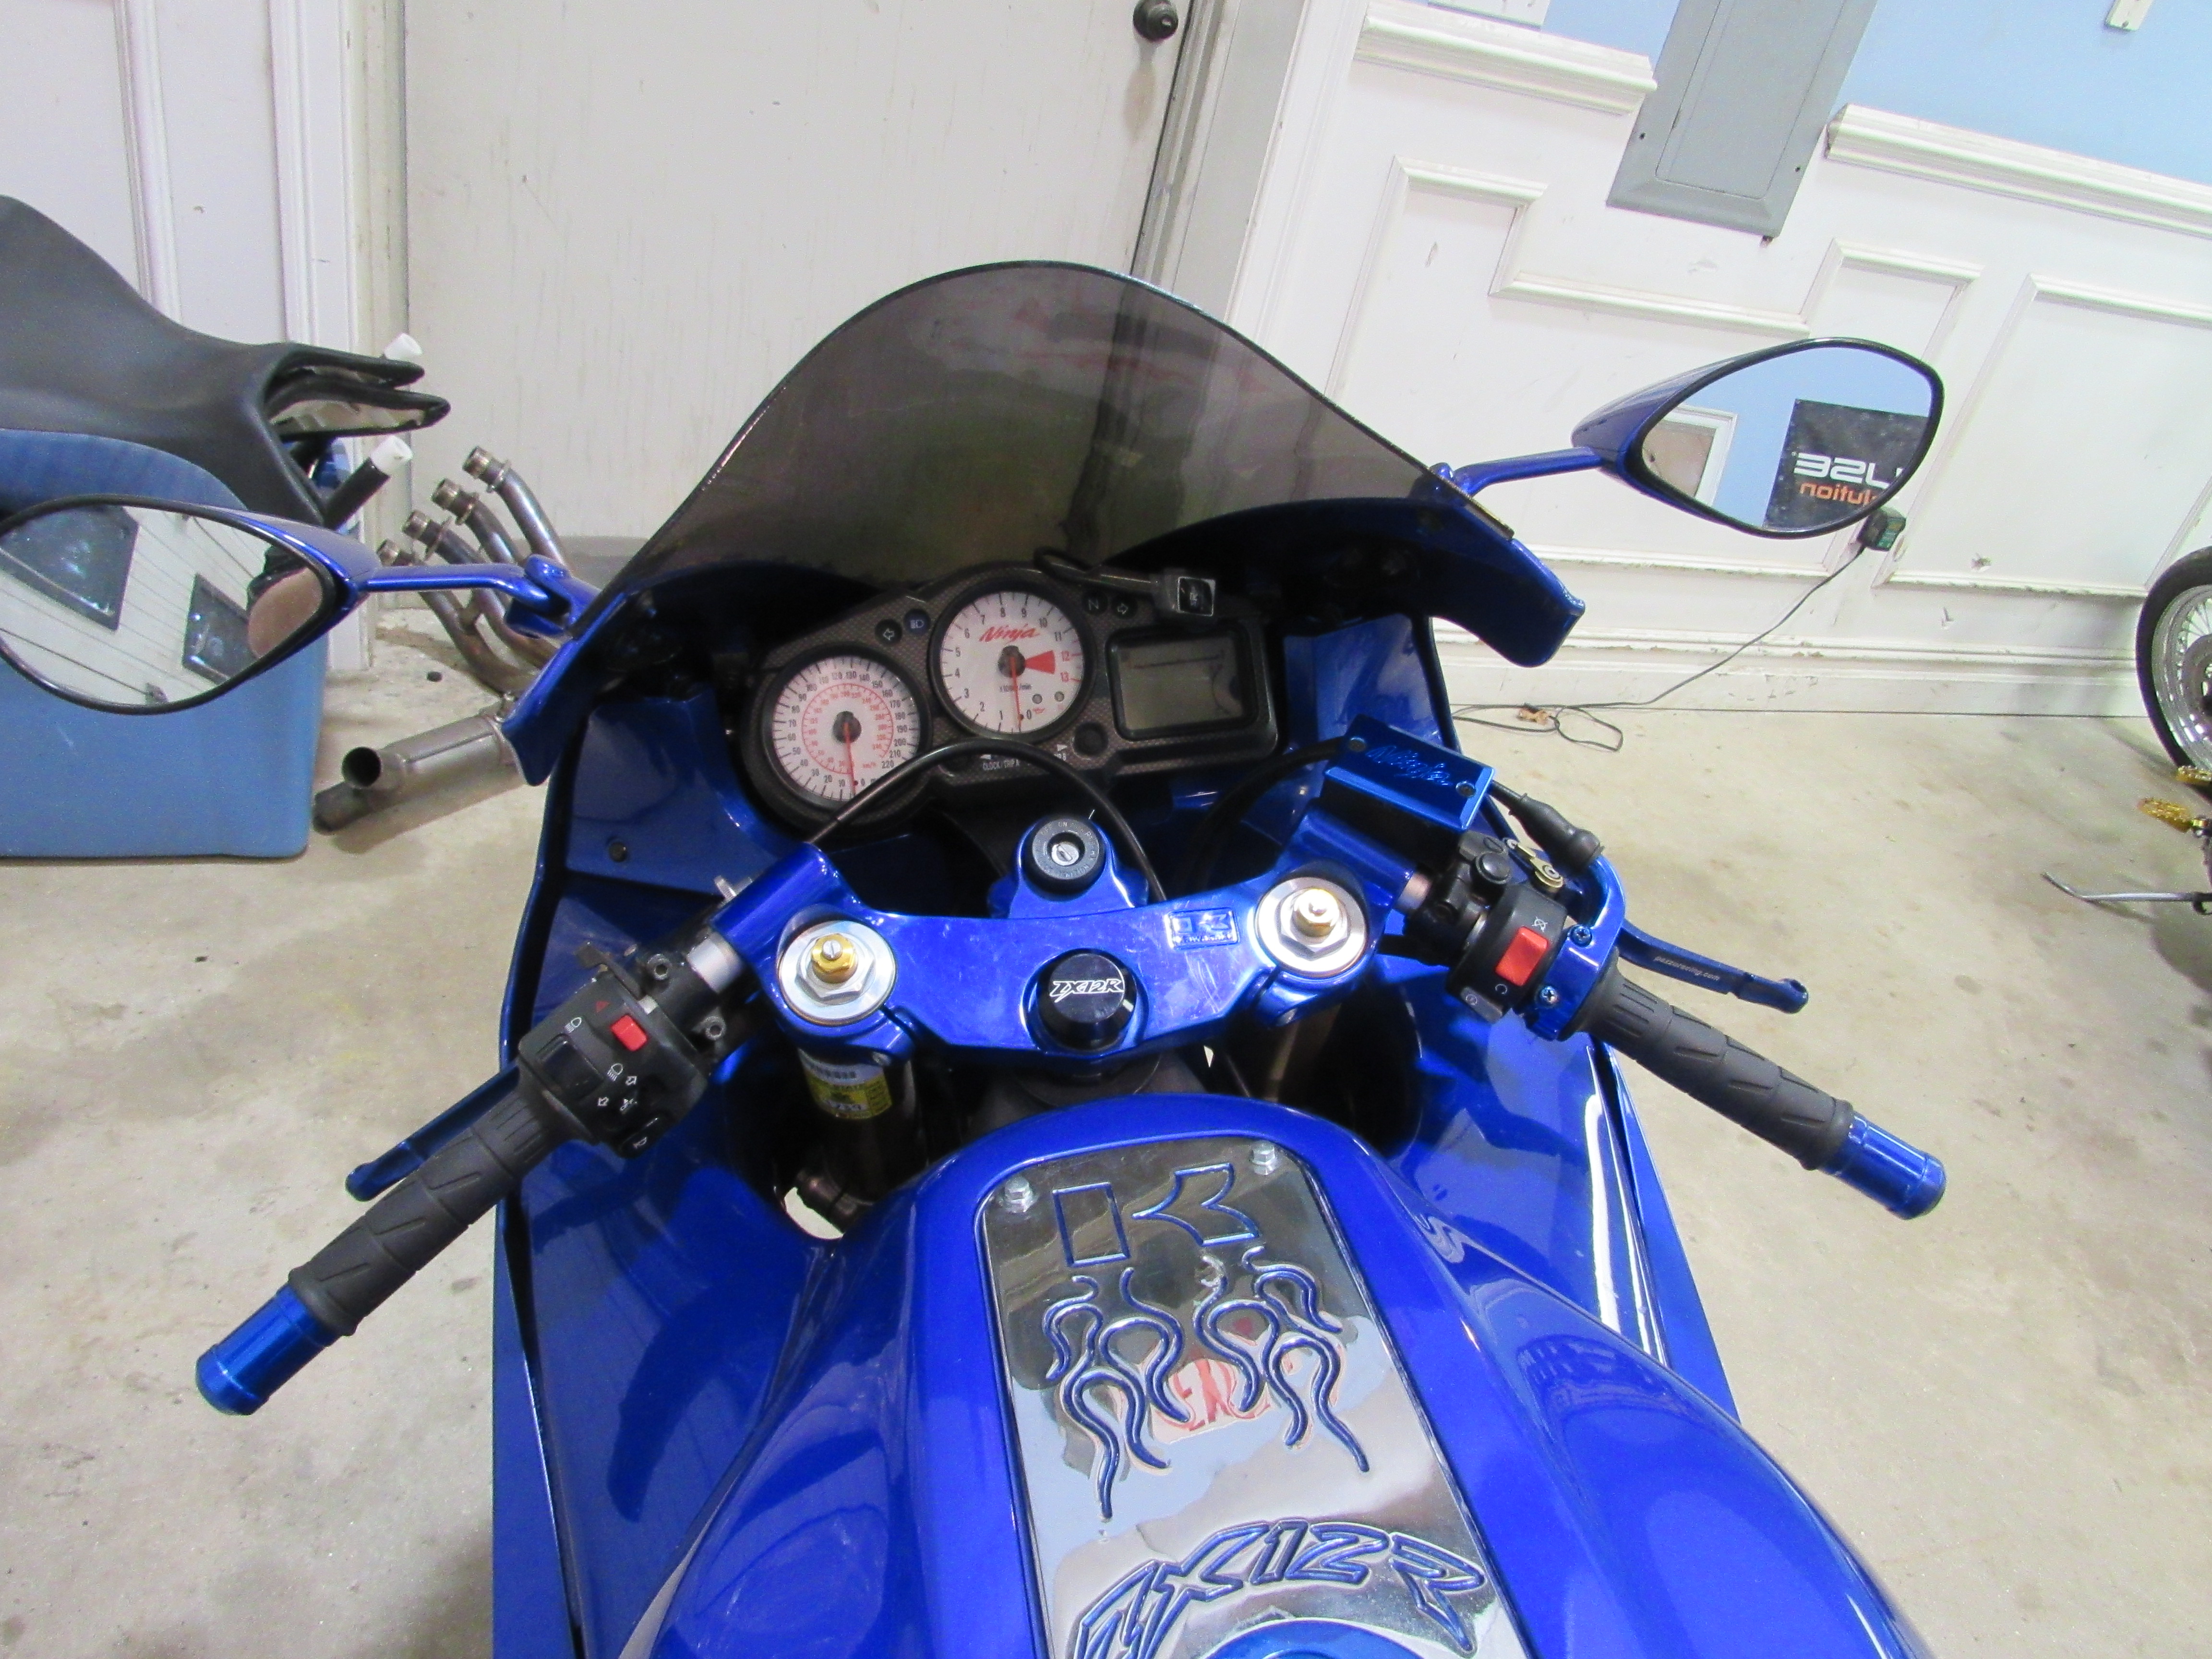 2004 ZX12R ONLY 4,790 MILES JUST SERVICED ZX12R ONLY 4,790 MILES JUST SERVICED 2563 - Click for larger photo